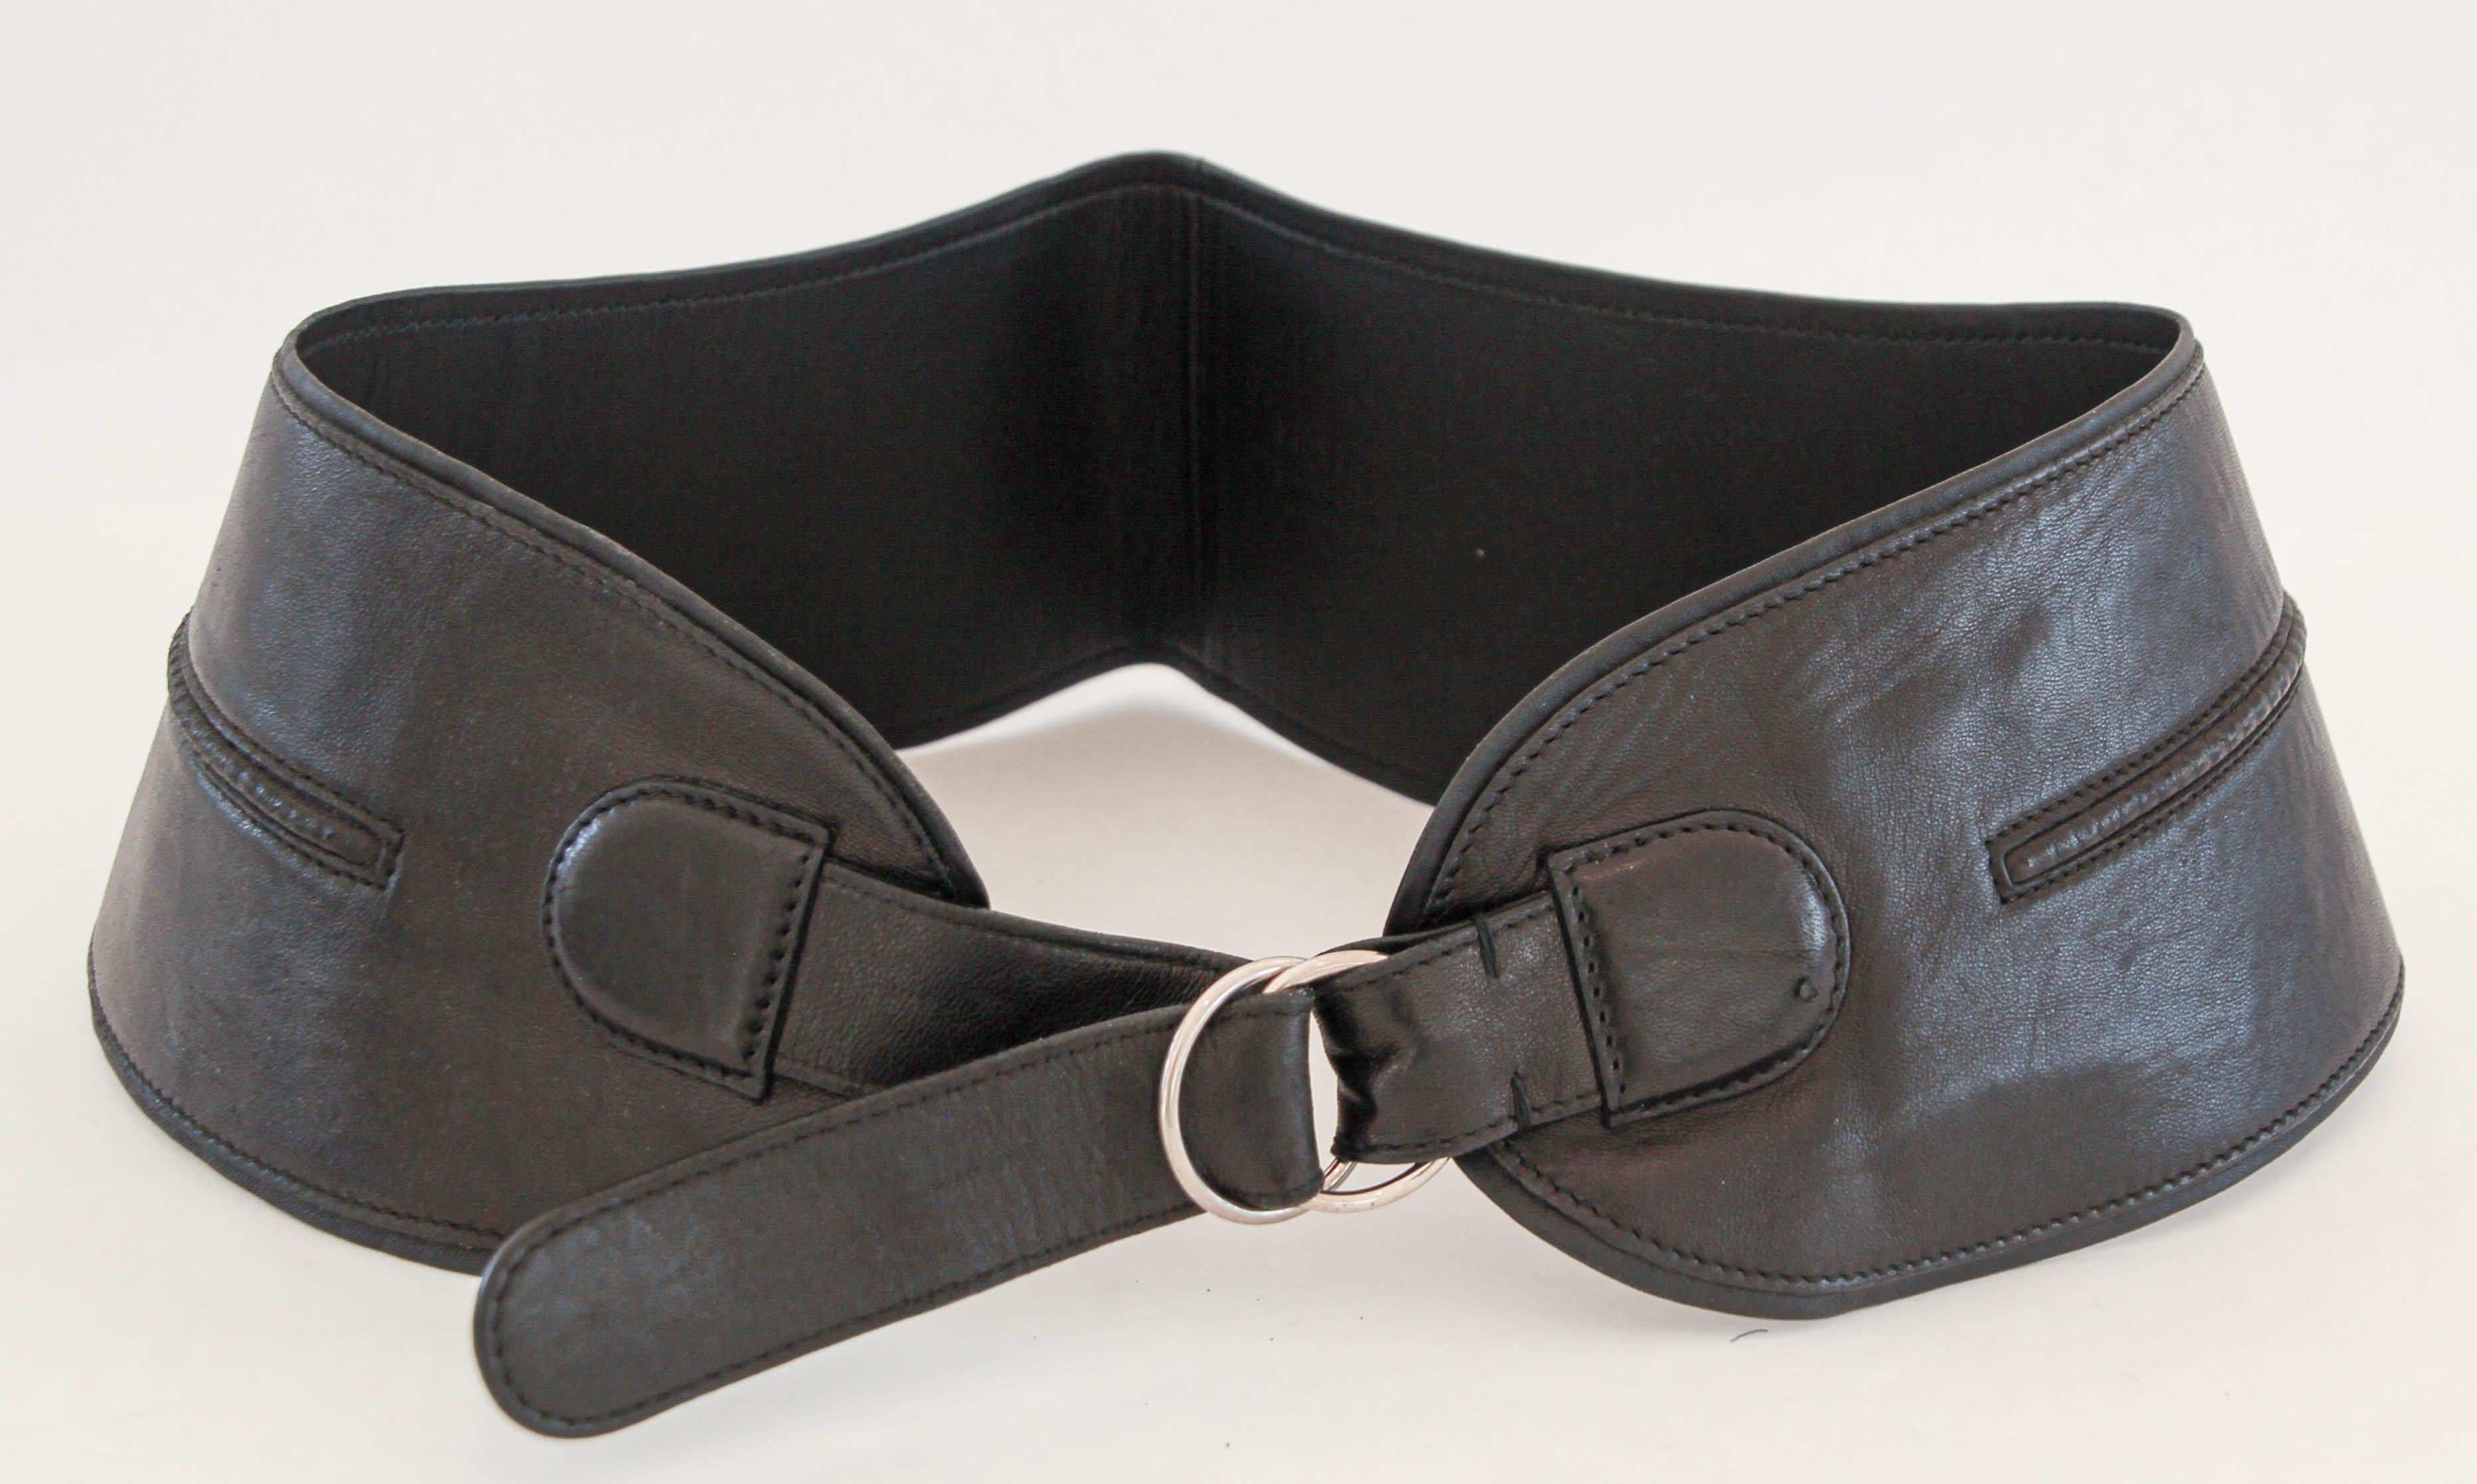 Late 1980's YVES SAINT LAURENT Black Leather Wide Waist Belt.
Rare, black leather belt with black leather trim and gunmetal hardware from Yves Saint Laurent dating to the 1980's. 
Black leather calfskin.
Yves Saint Laurent.
Amazing YVES SAINT